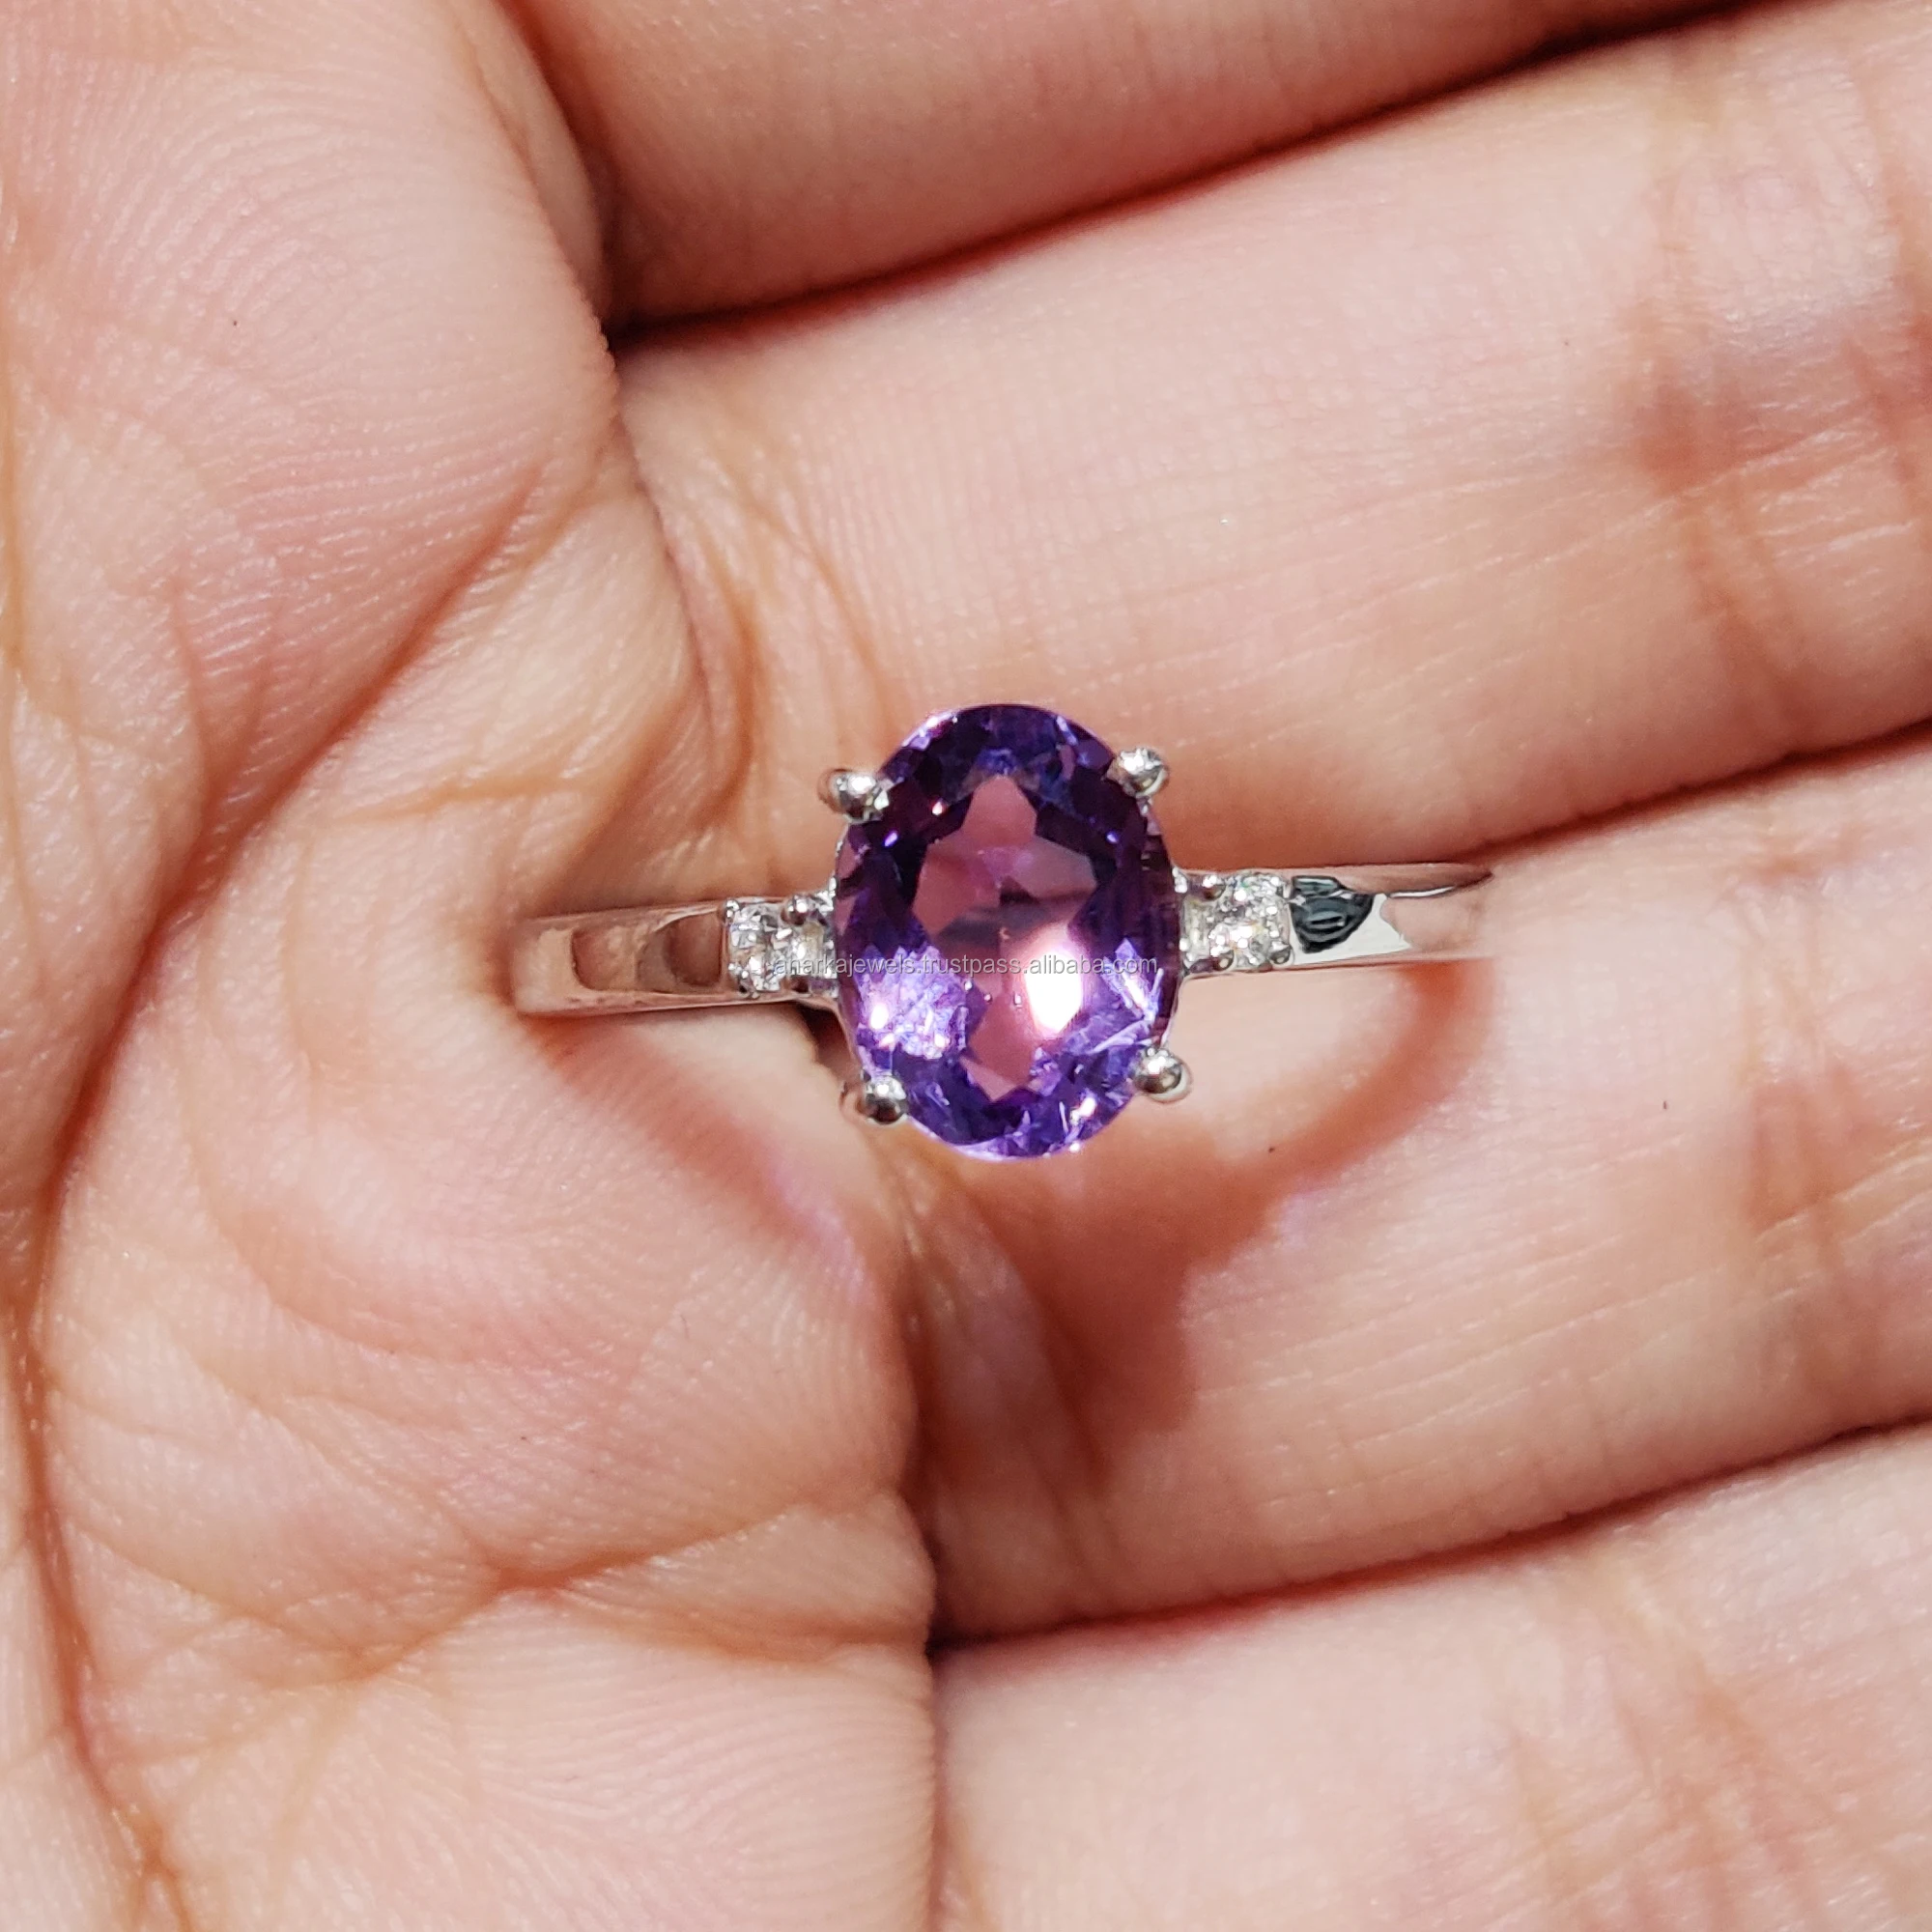 Natural Amethyst Handmade Unique 925 Sterling Silver Ring 7.25 A4153 